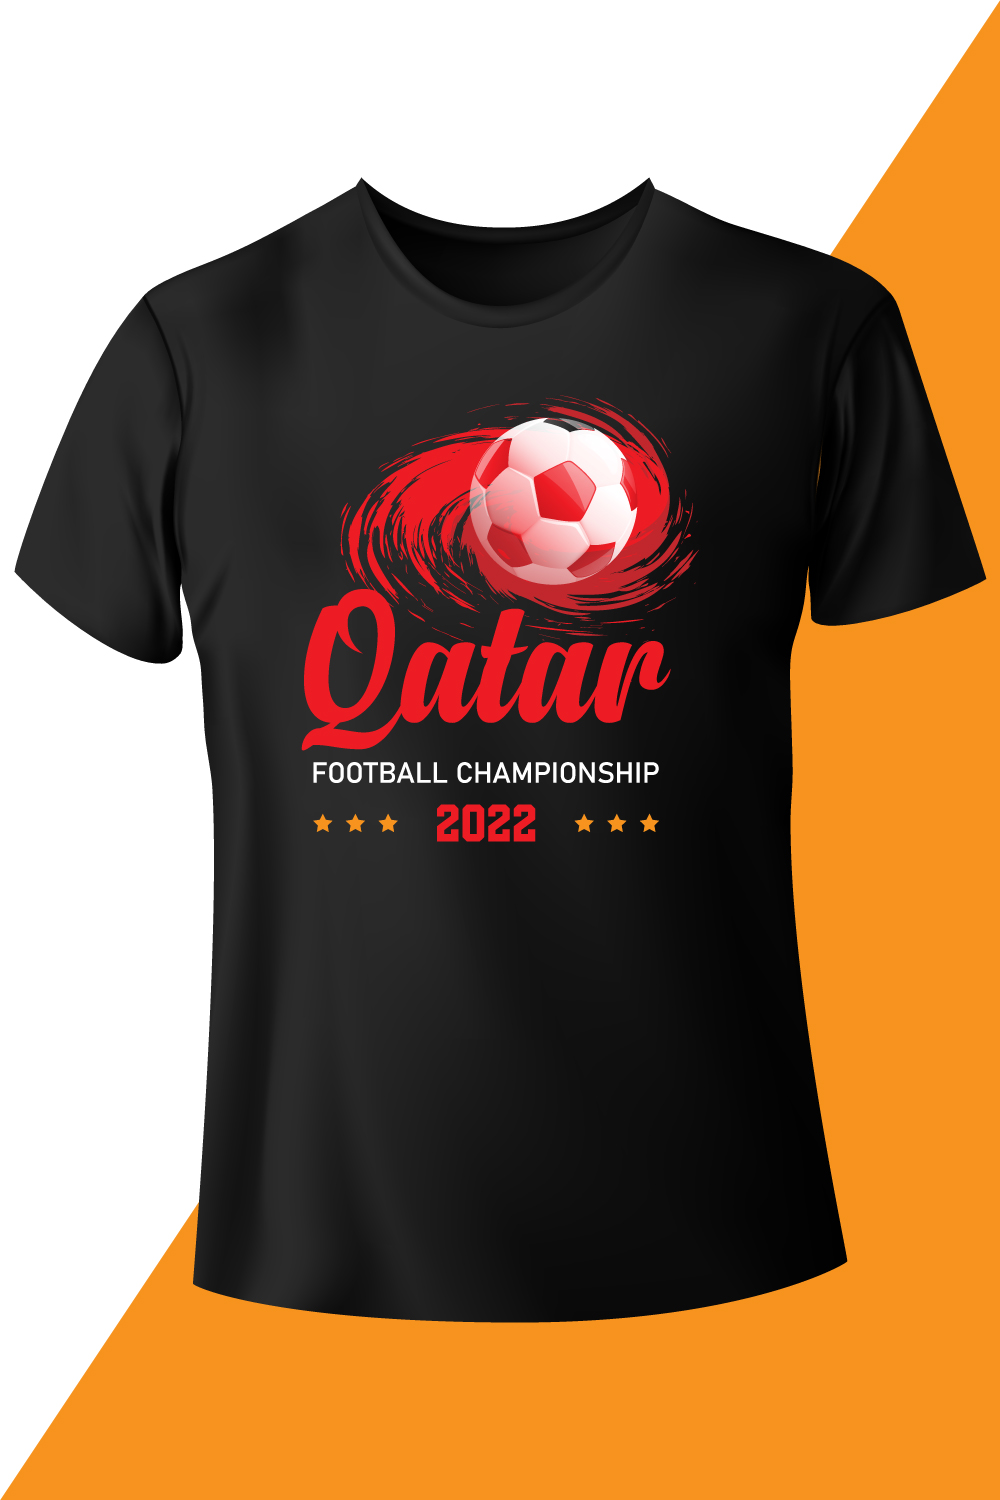 Image of a black T-shirt with a beautiful print on the theme of the World Cup in Qatar.